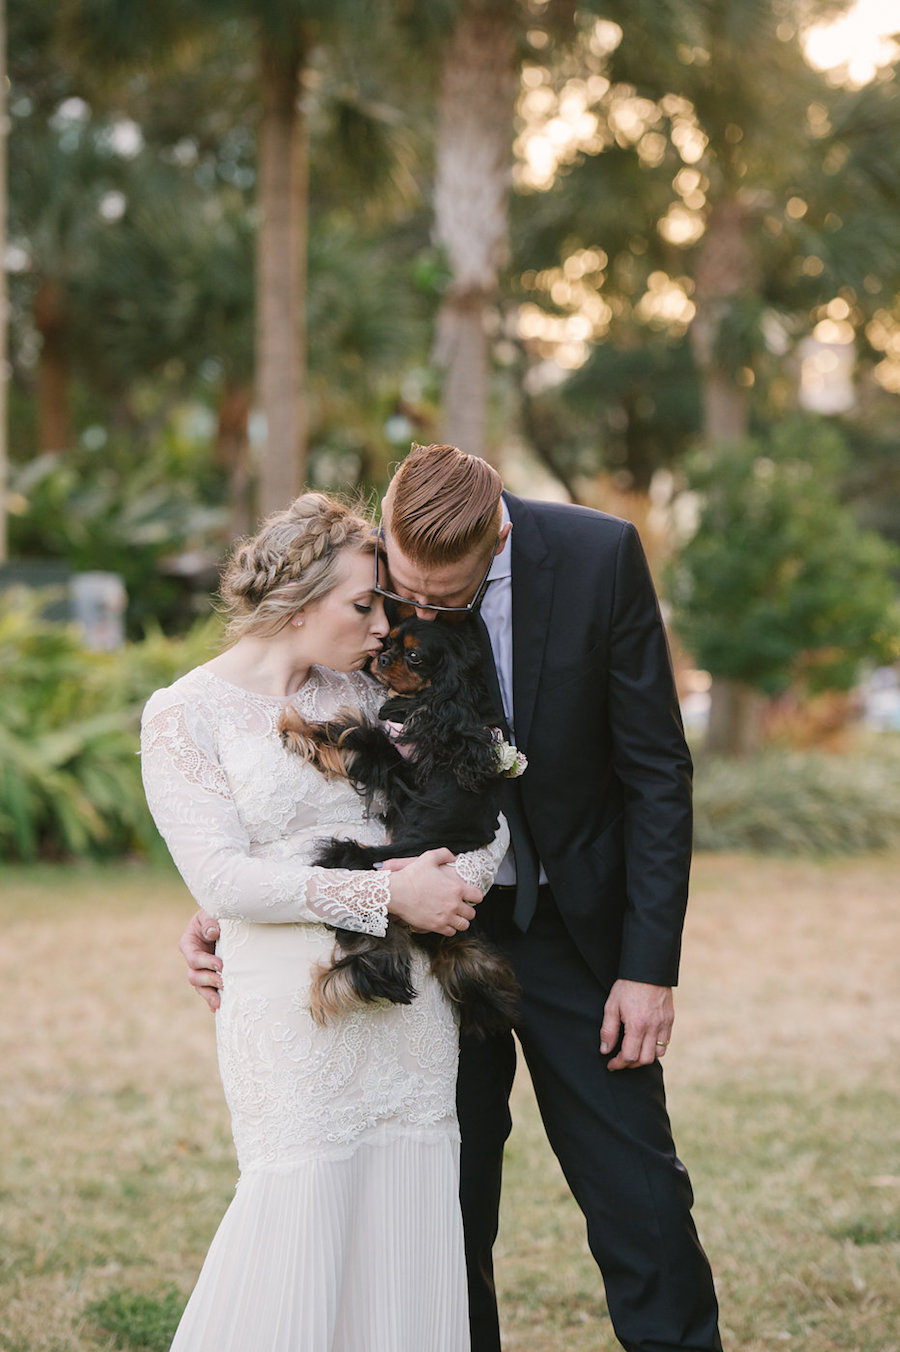 Bride and Groom Florida Wedding Portrait with Puppy in Long Sleeve Lace Wedding Dress with Lace Veil and Groom in Tuxedo